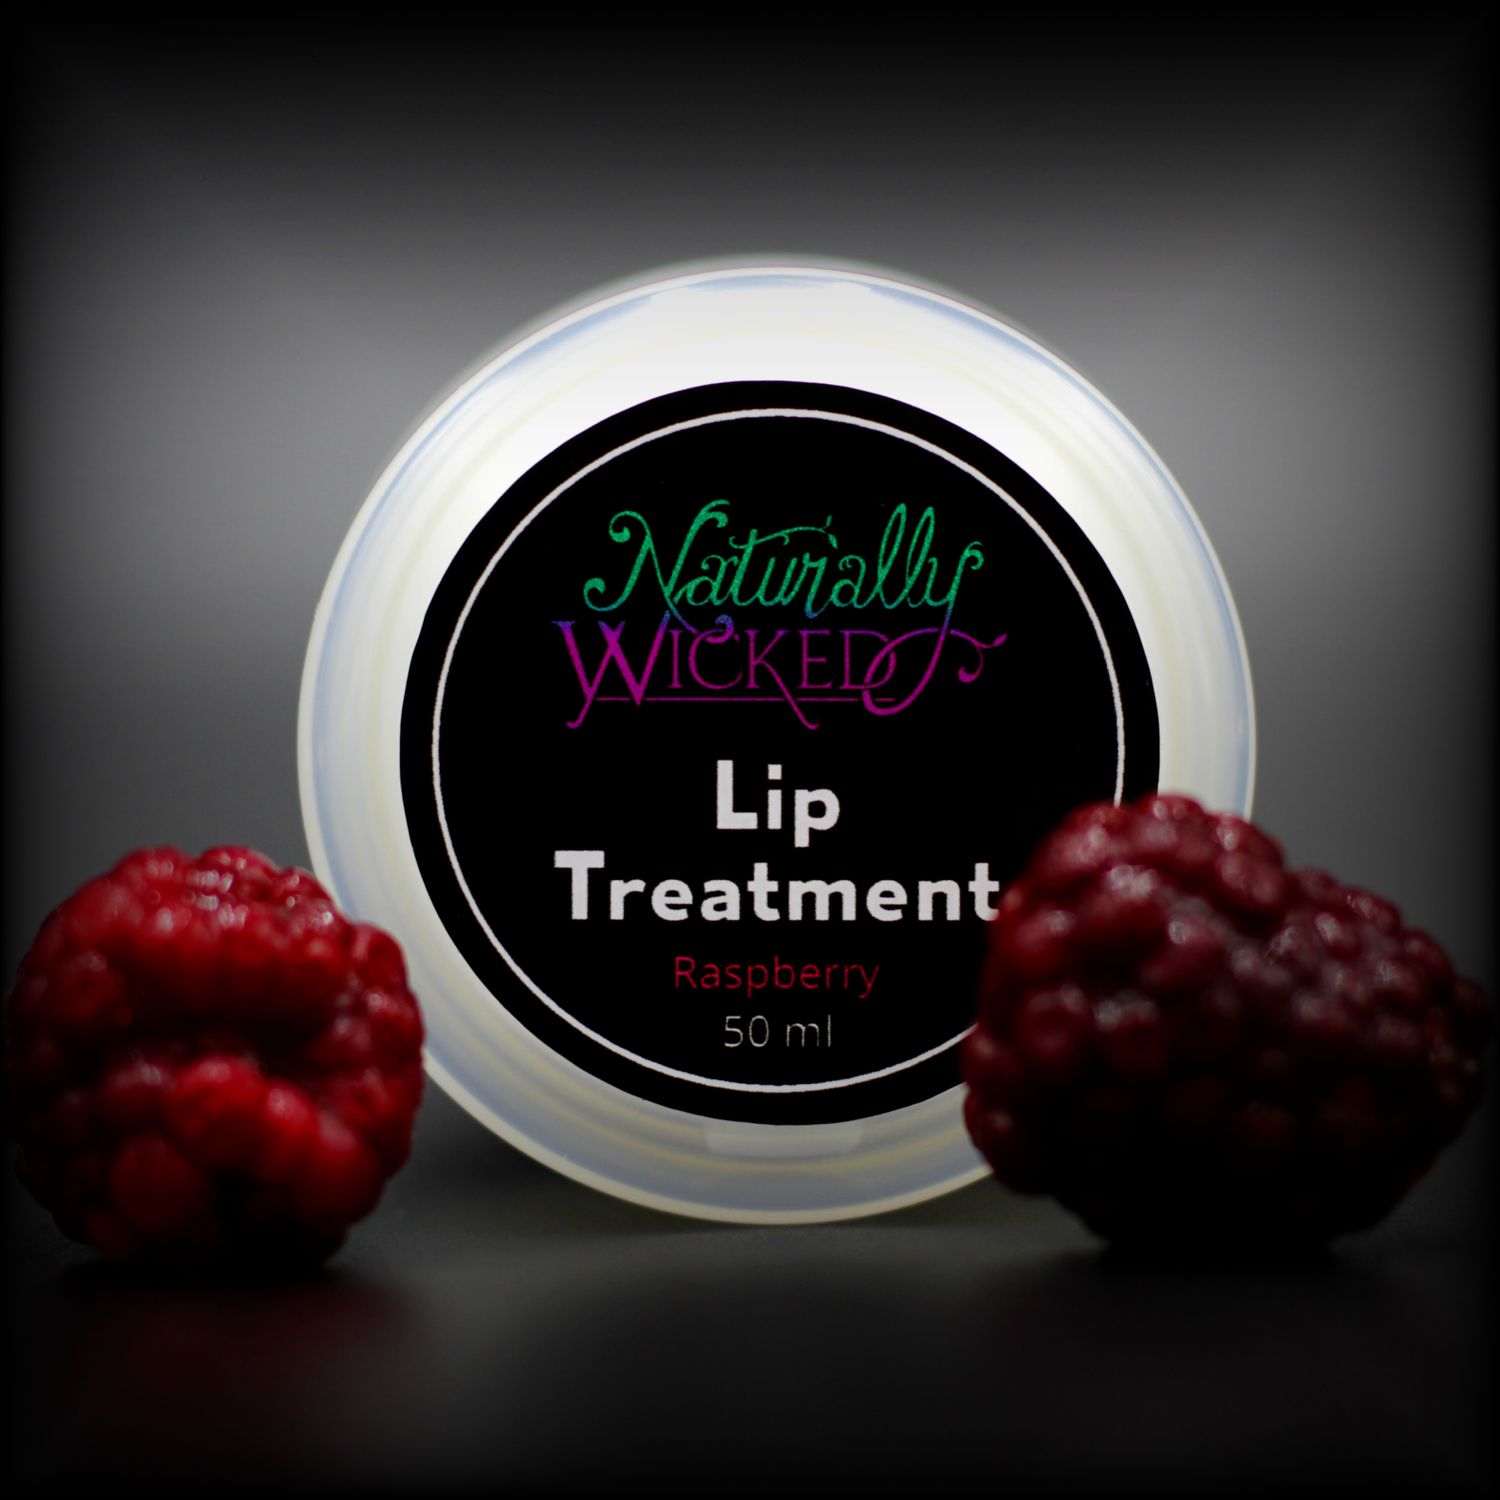 Naturally Wicked Raspberry Lip Treatment Lid With Two Bright Red Raspberries In Front